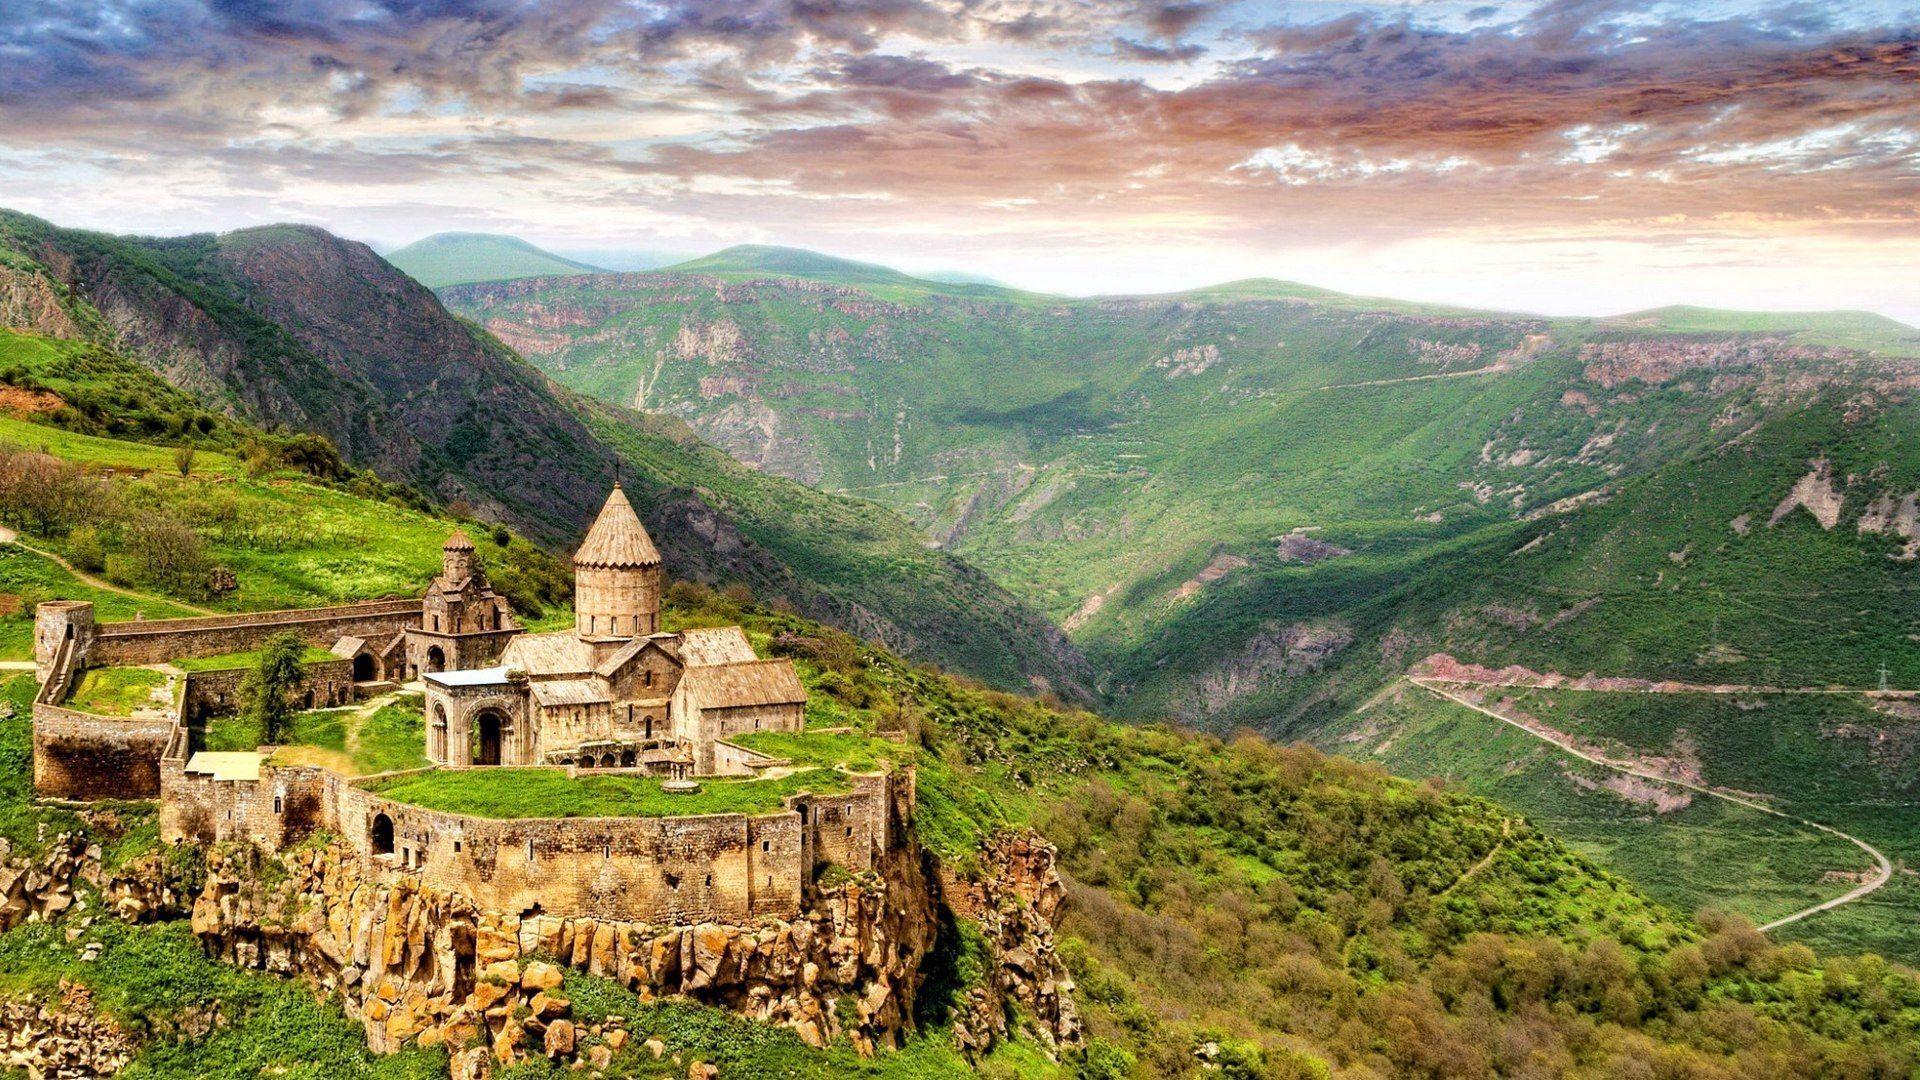 HOW TO GET TO ARMENIA, WHERE TO STAY, WHAT TO SEE